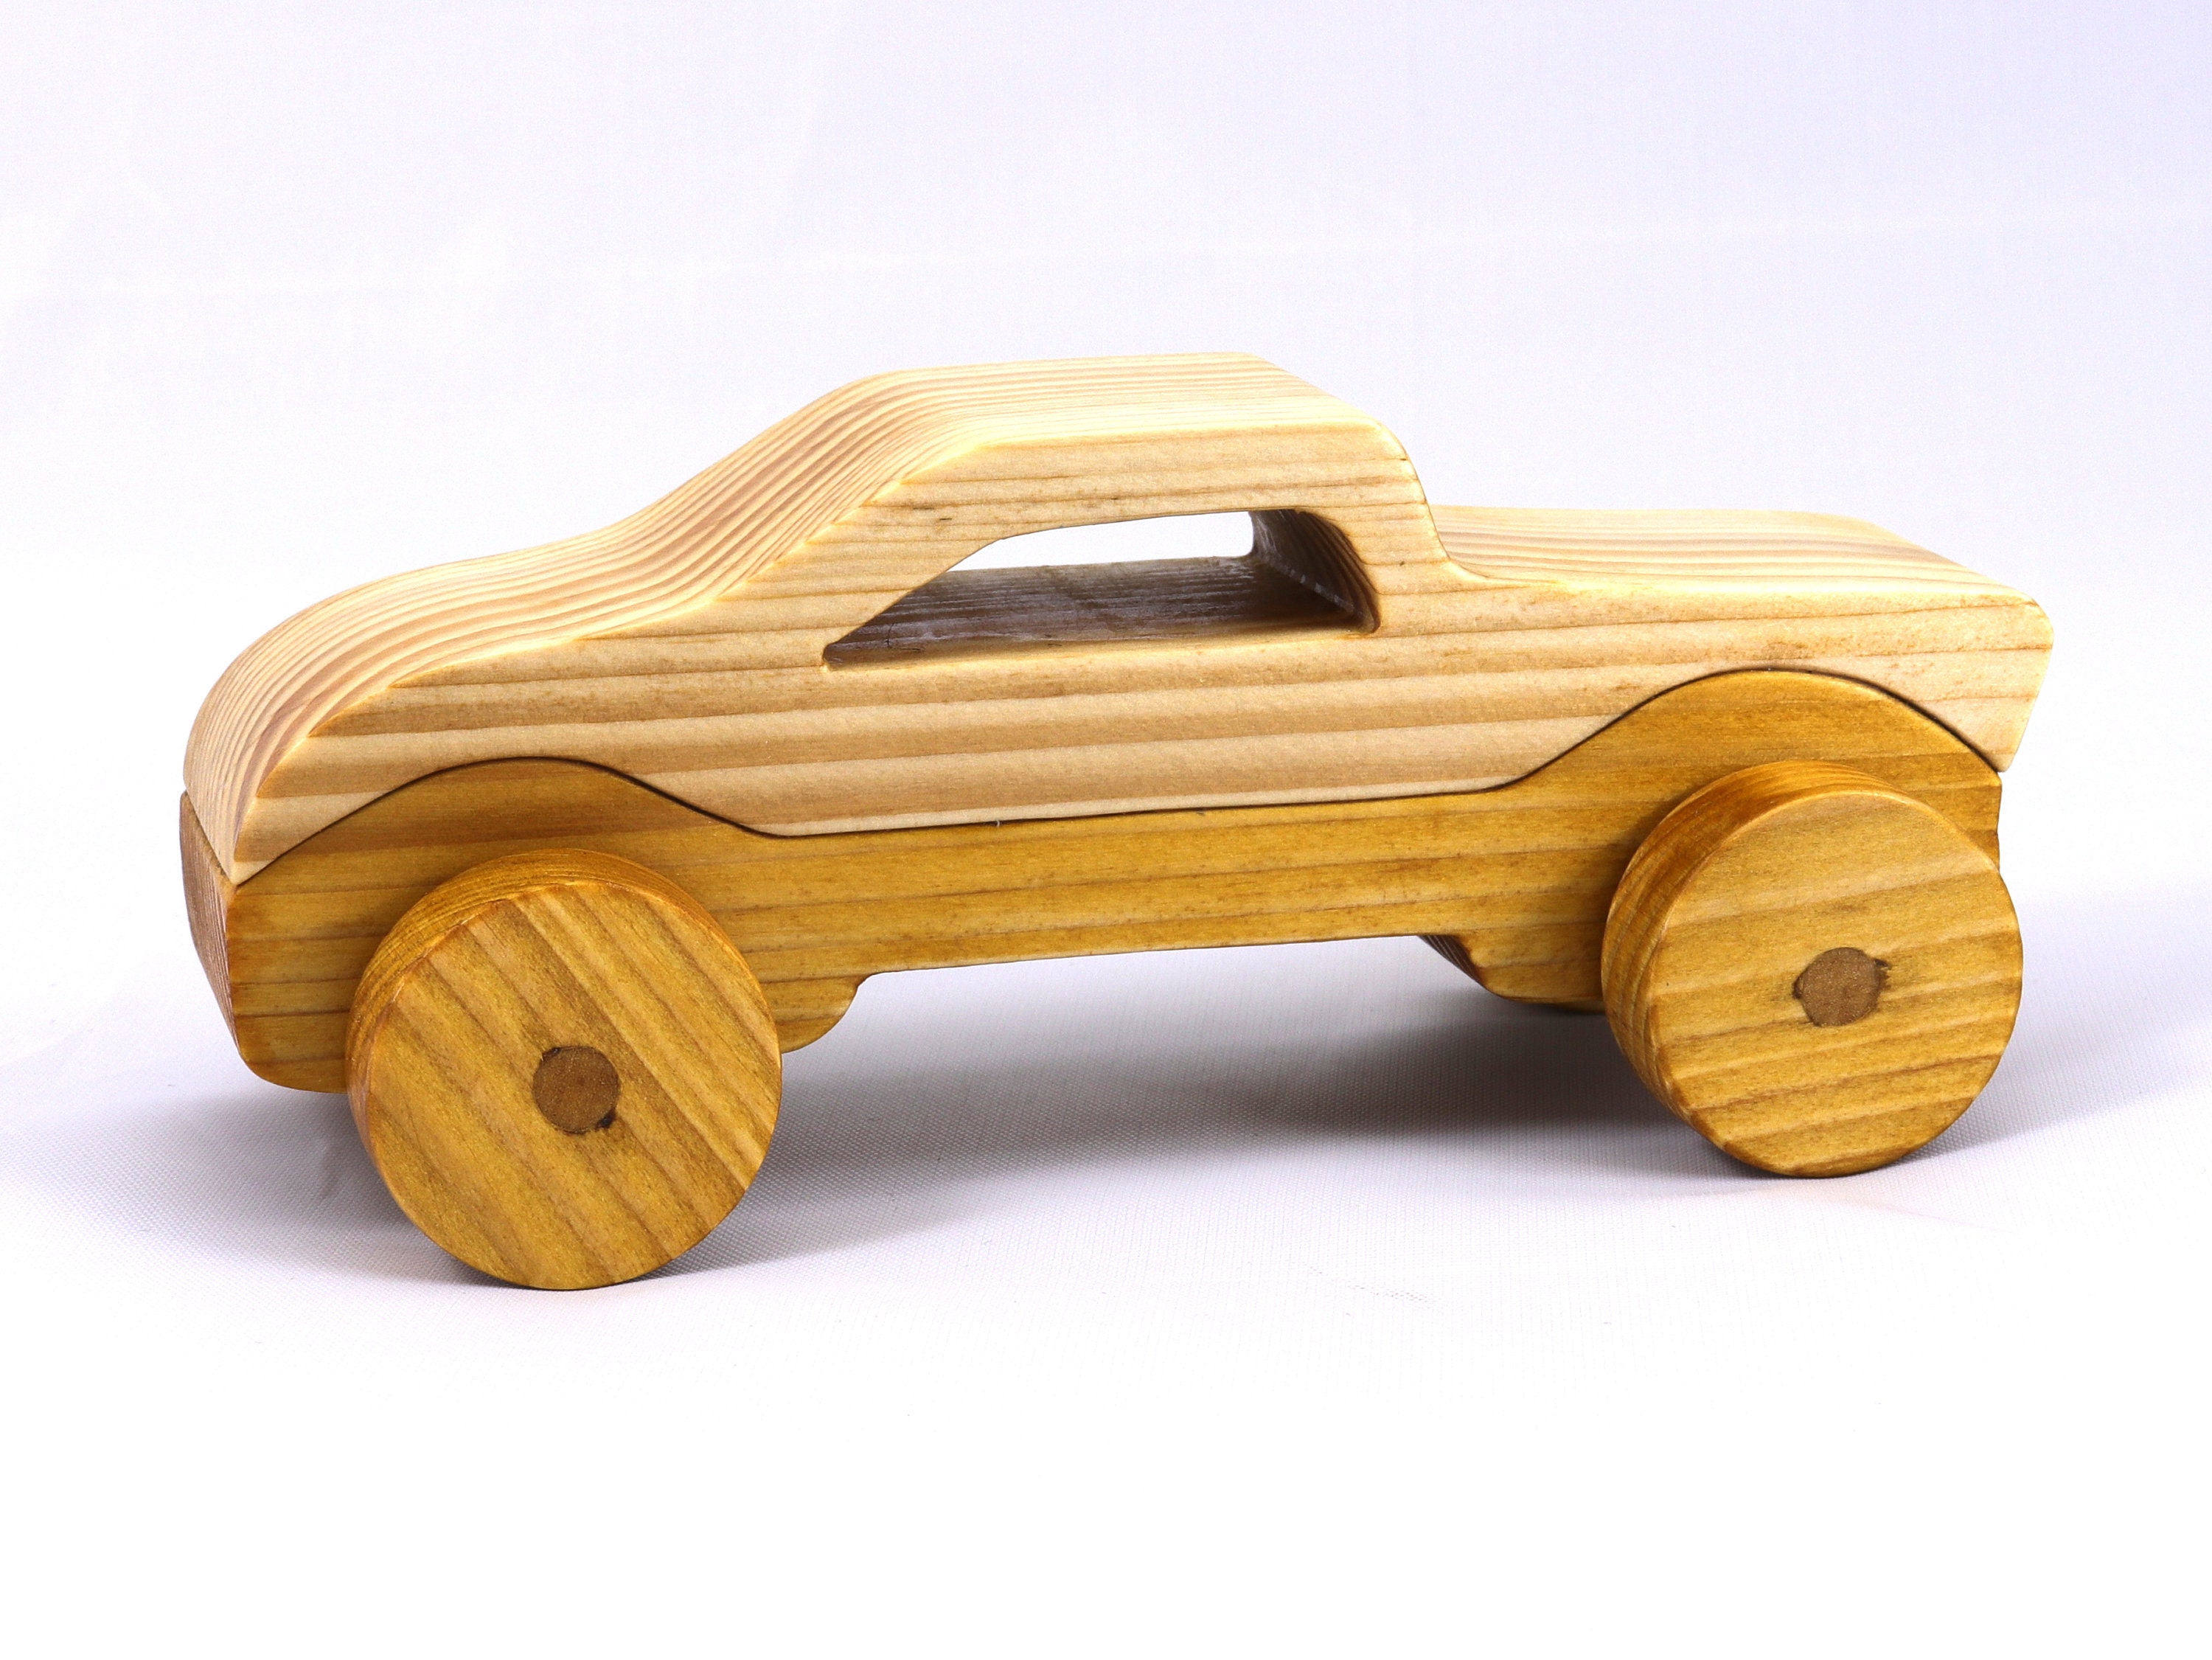 Wooden Toy Car Handmade and Finished With a Two-tone Clear and